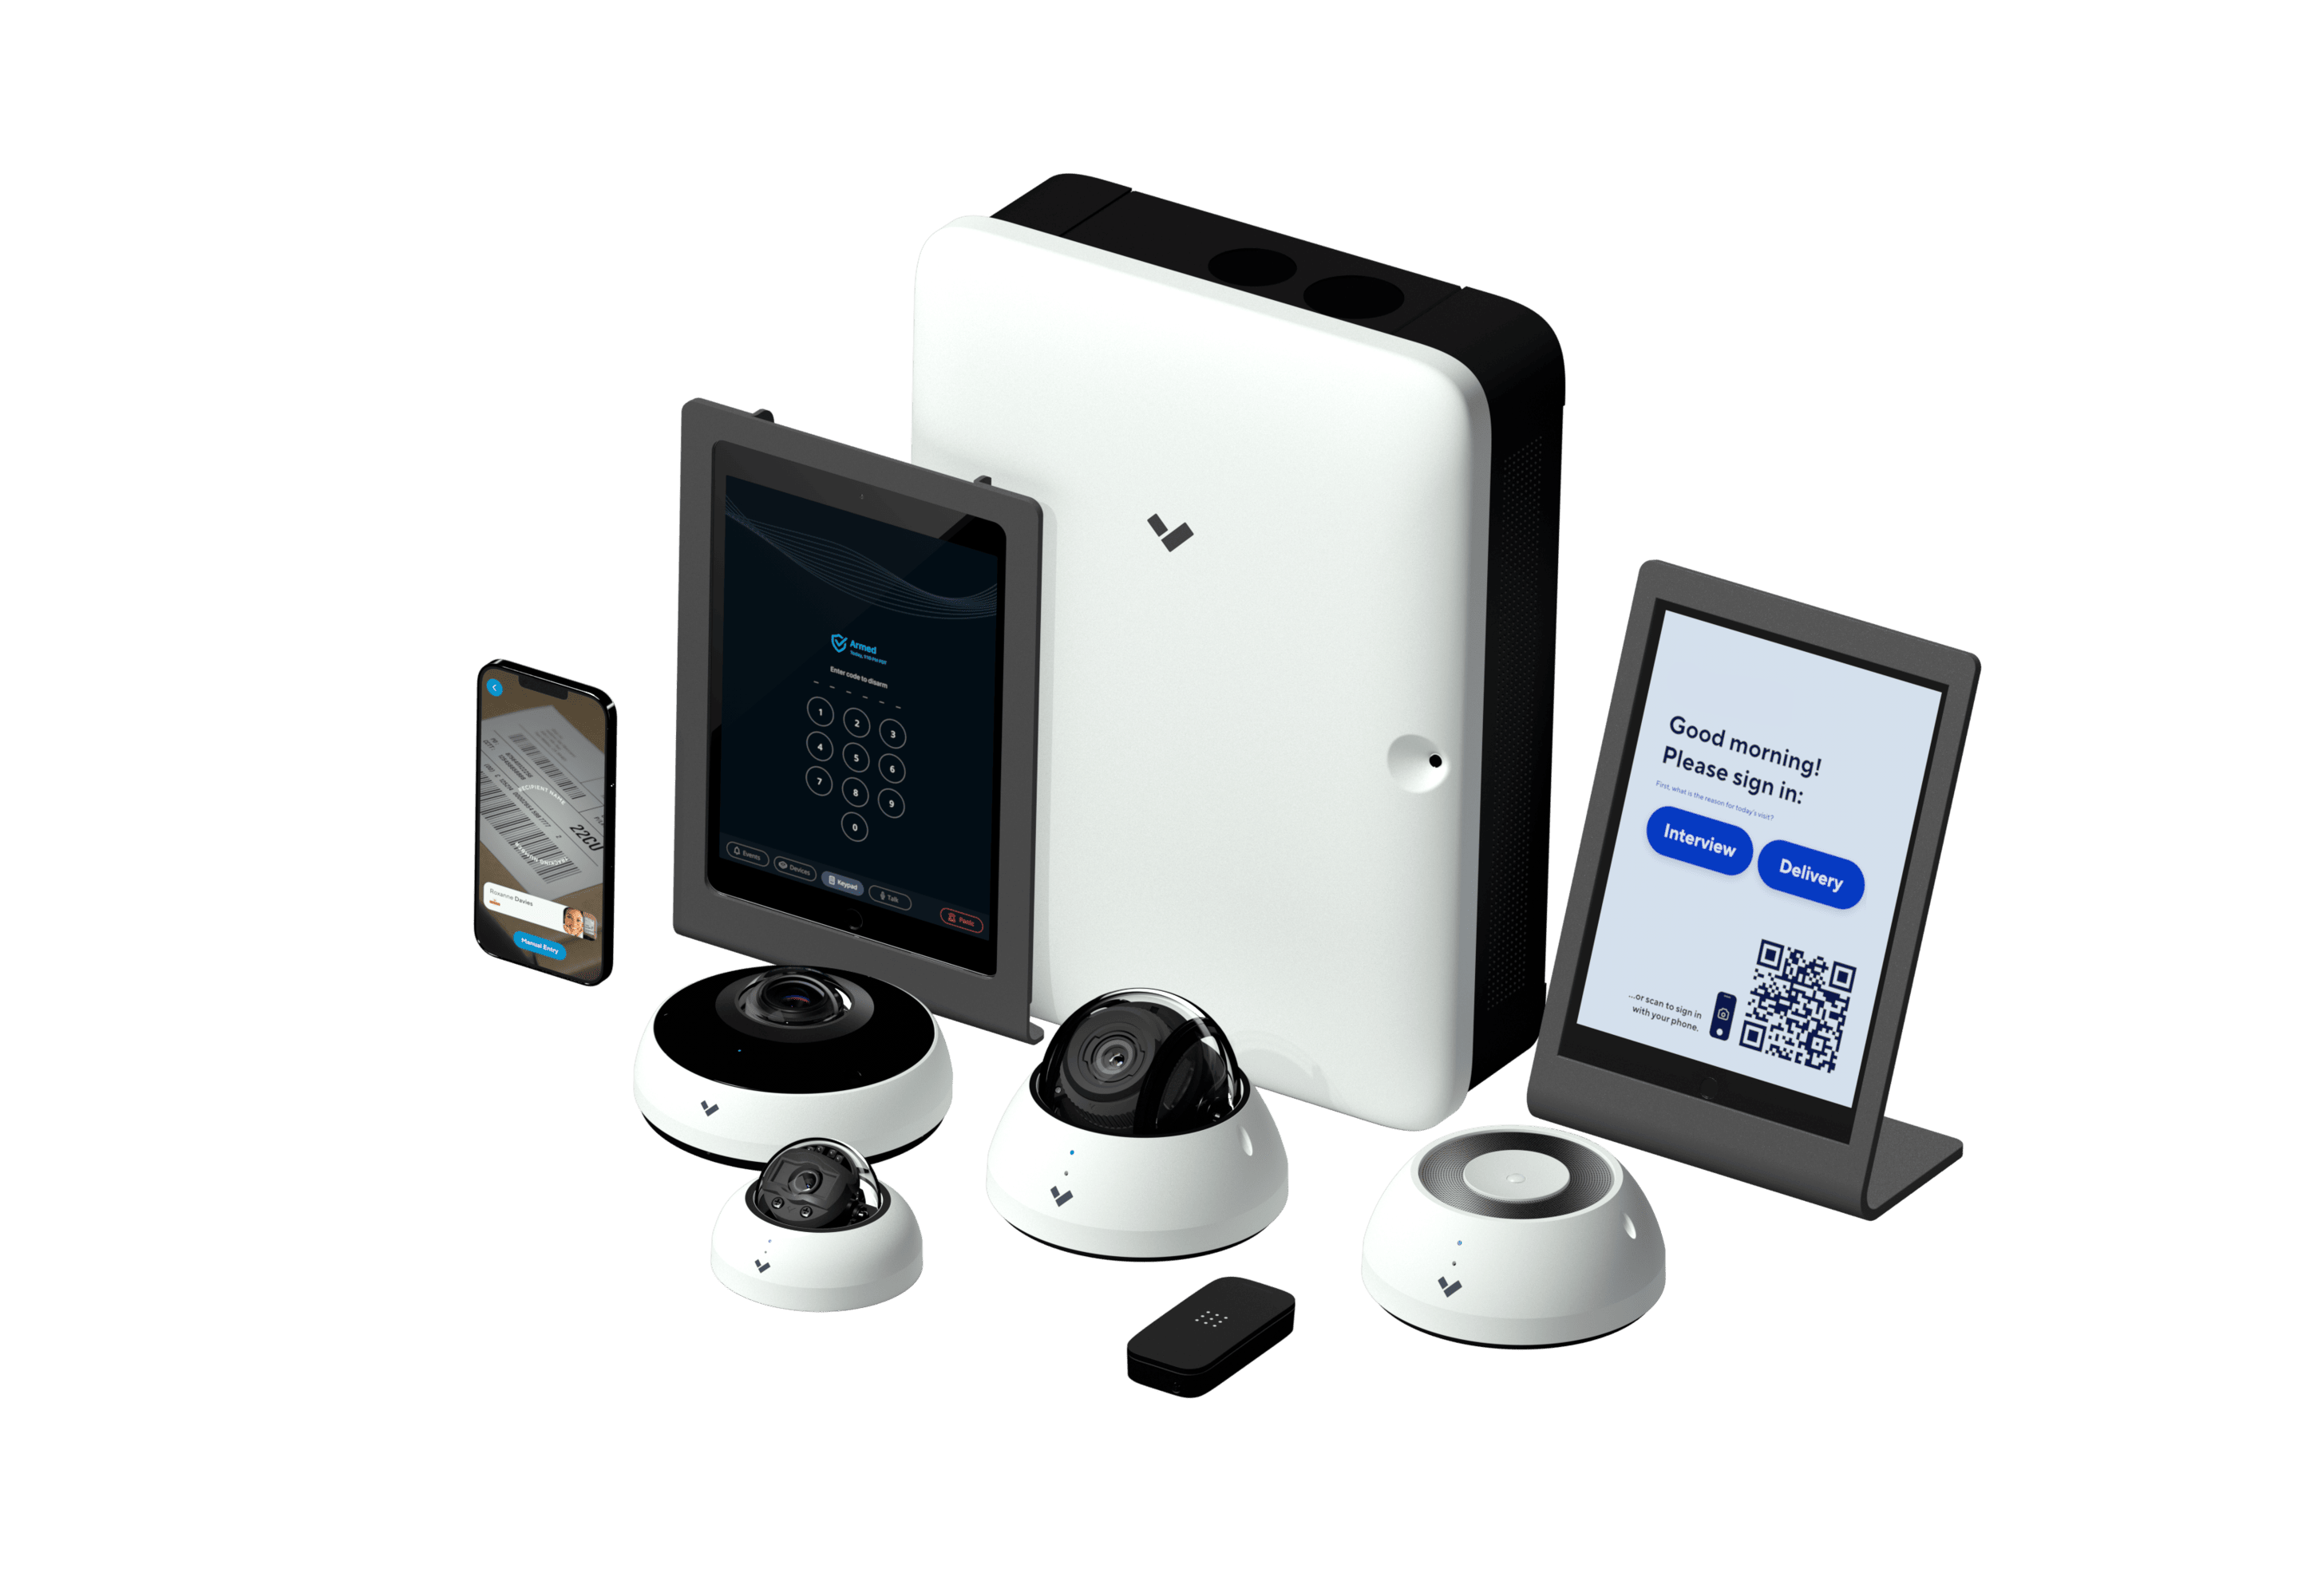 Verkada device family for security systems in Virginia